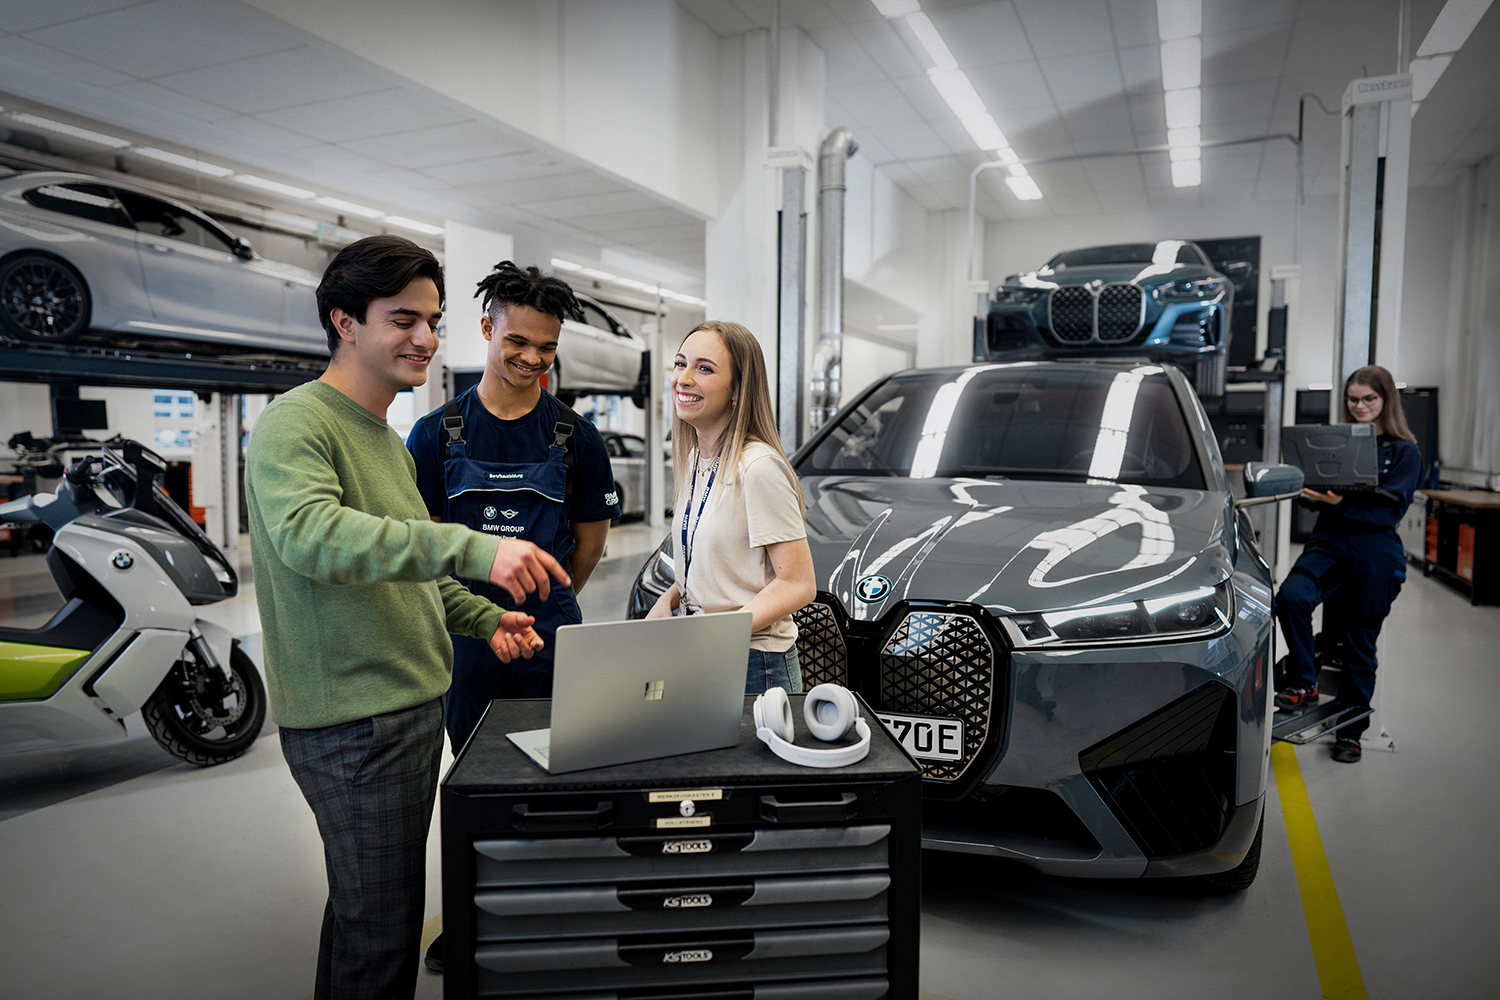 A group of apprentices are having a chat in front of a car at BMW Welt Munich